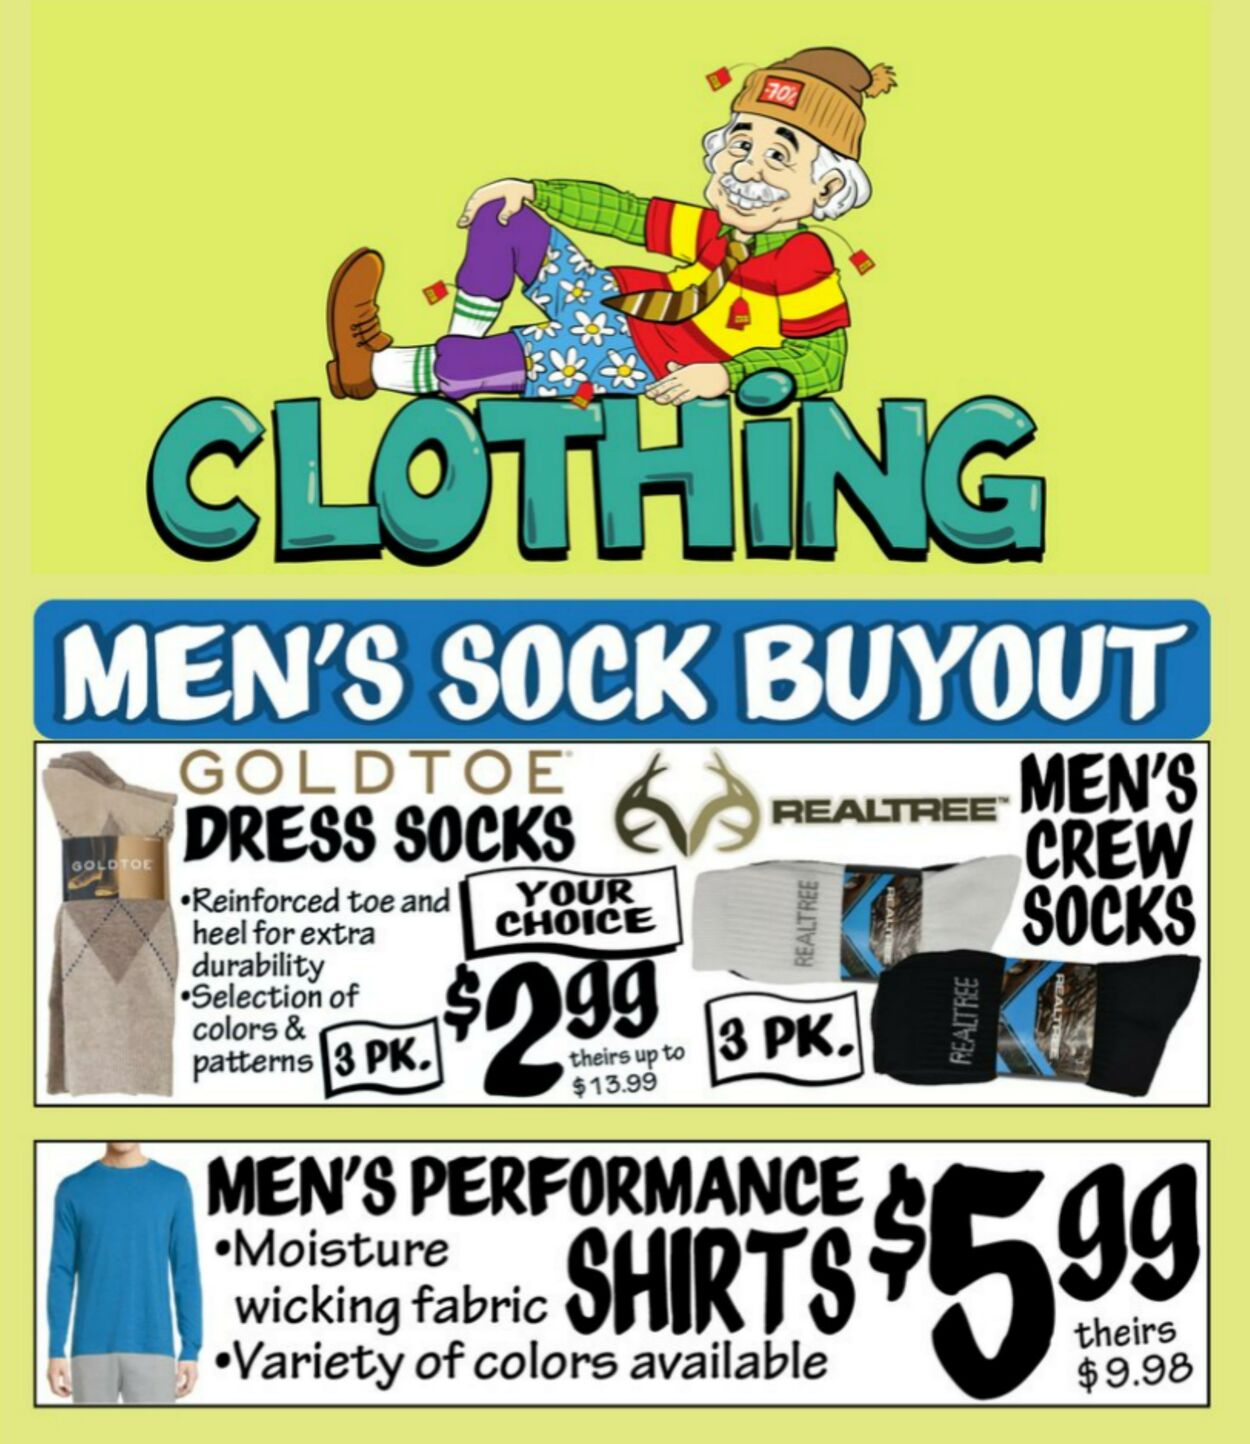 Weekly ad Ollie's 09/22/2022 - 09/28/2022